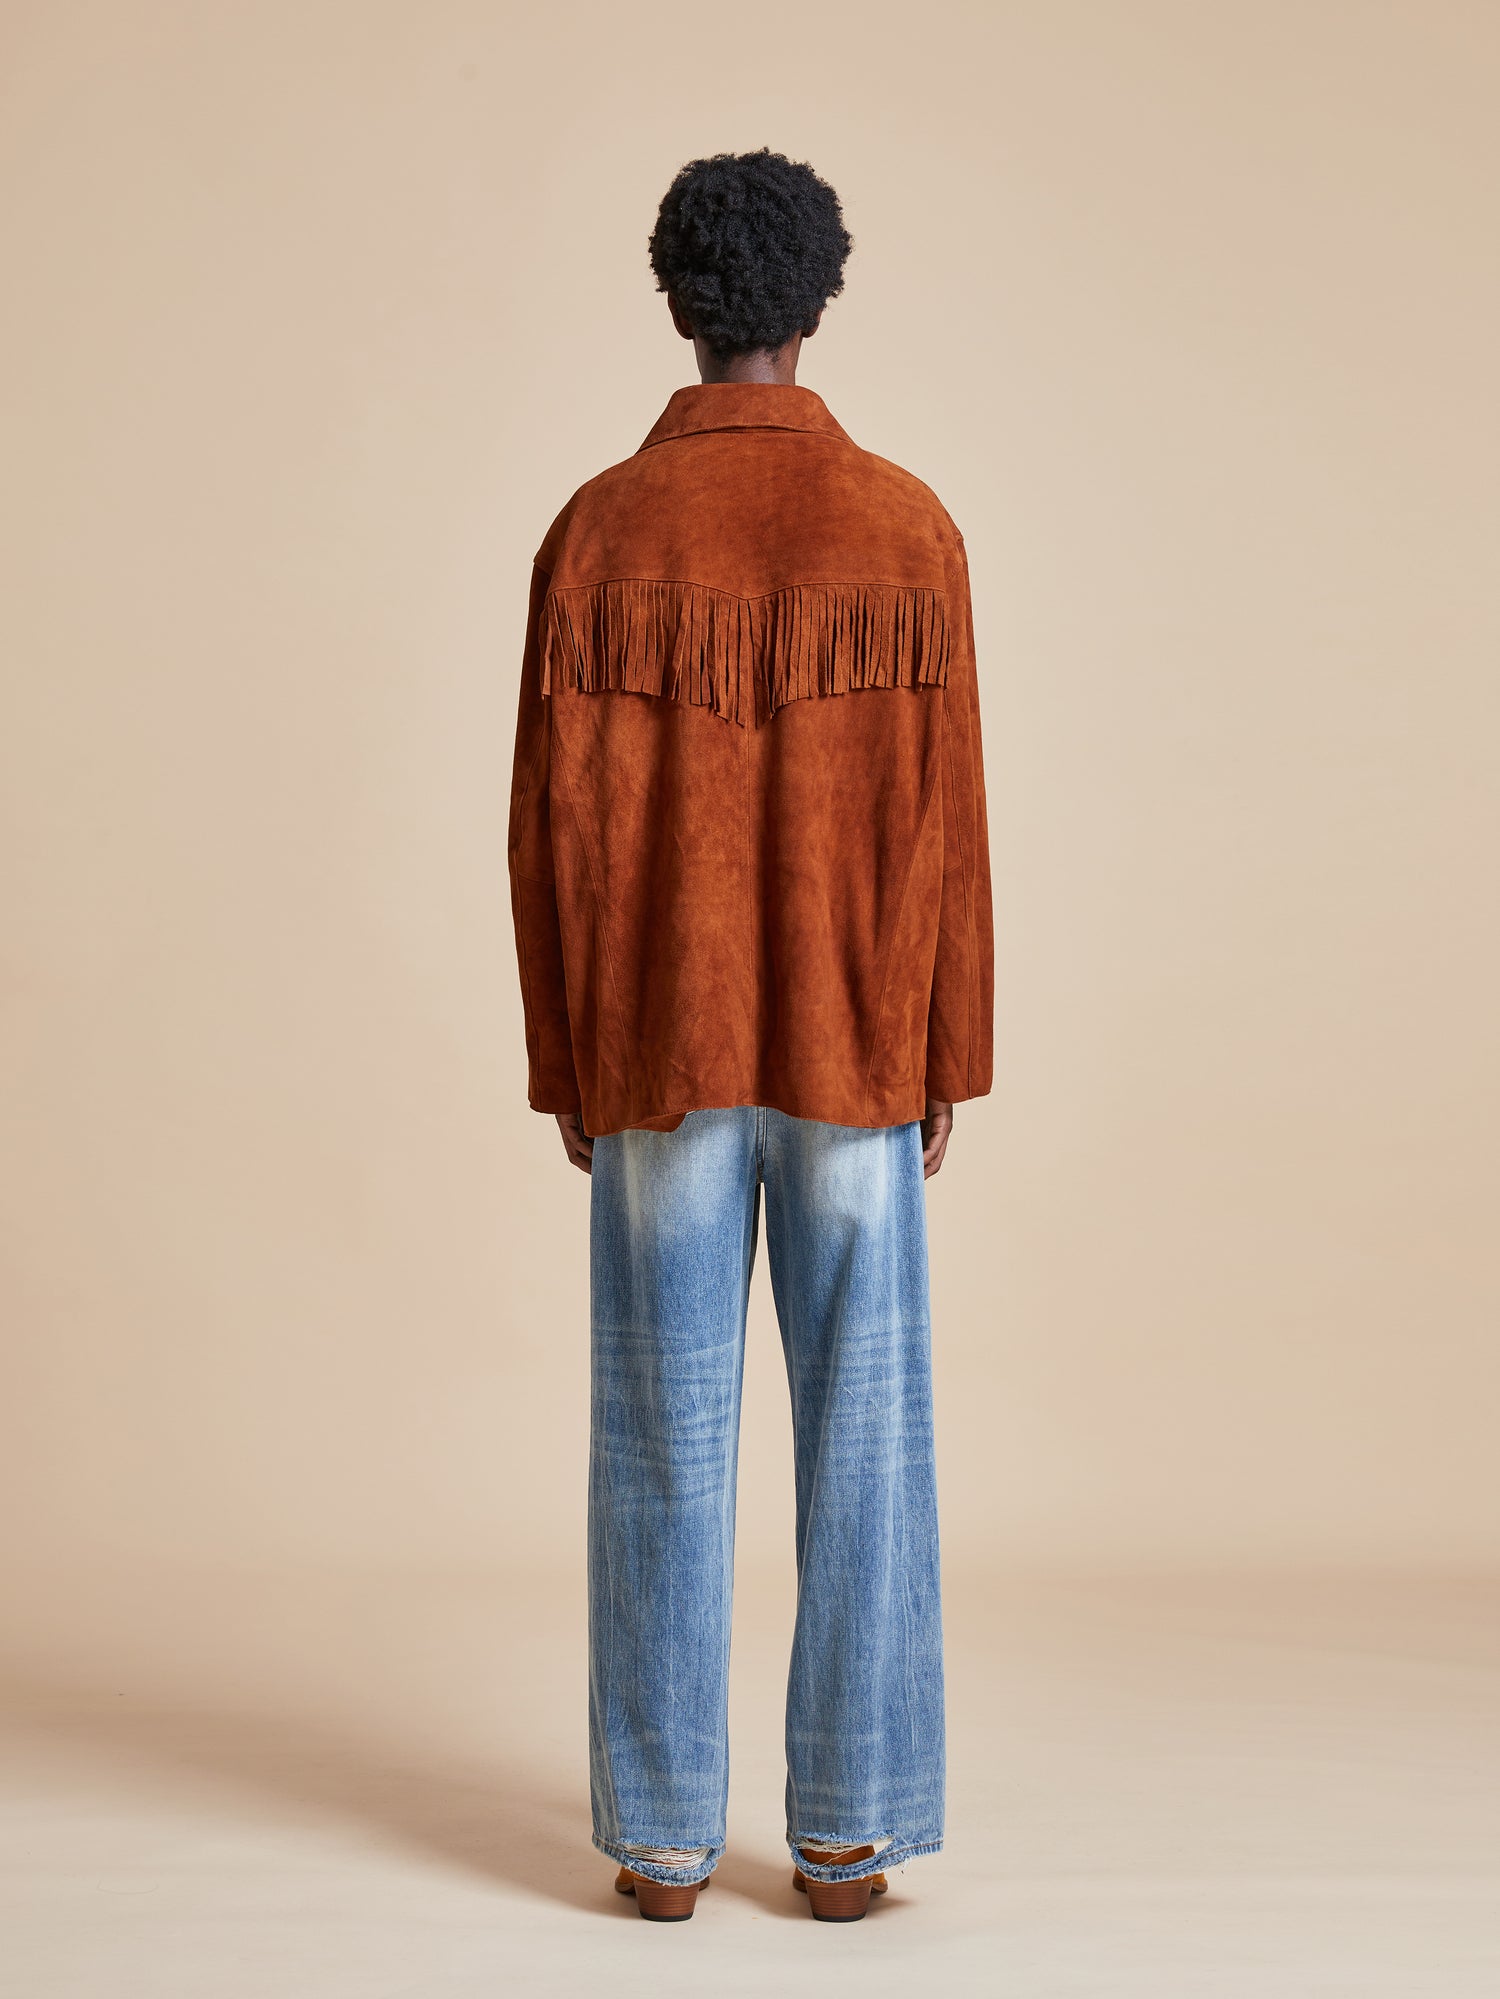 The back view of a man wearing a Found Tobacco Fringe Suede Buckle Jacket and jeans.